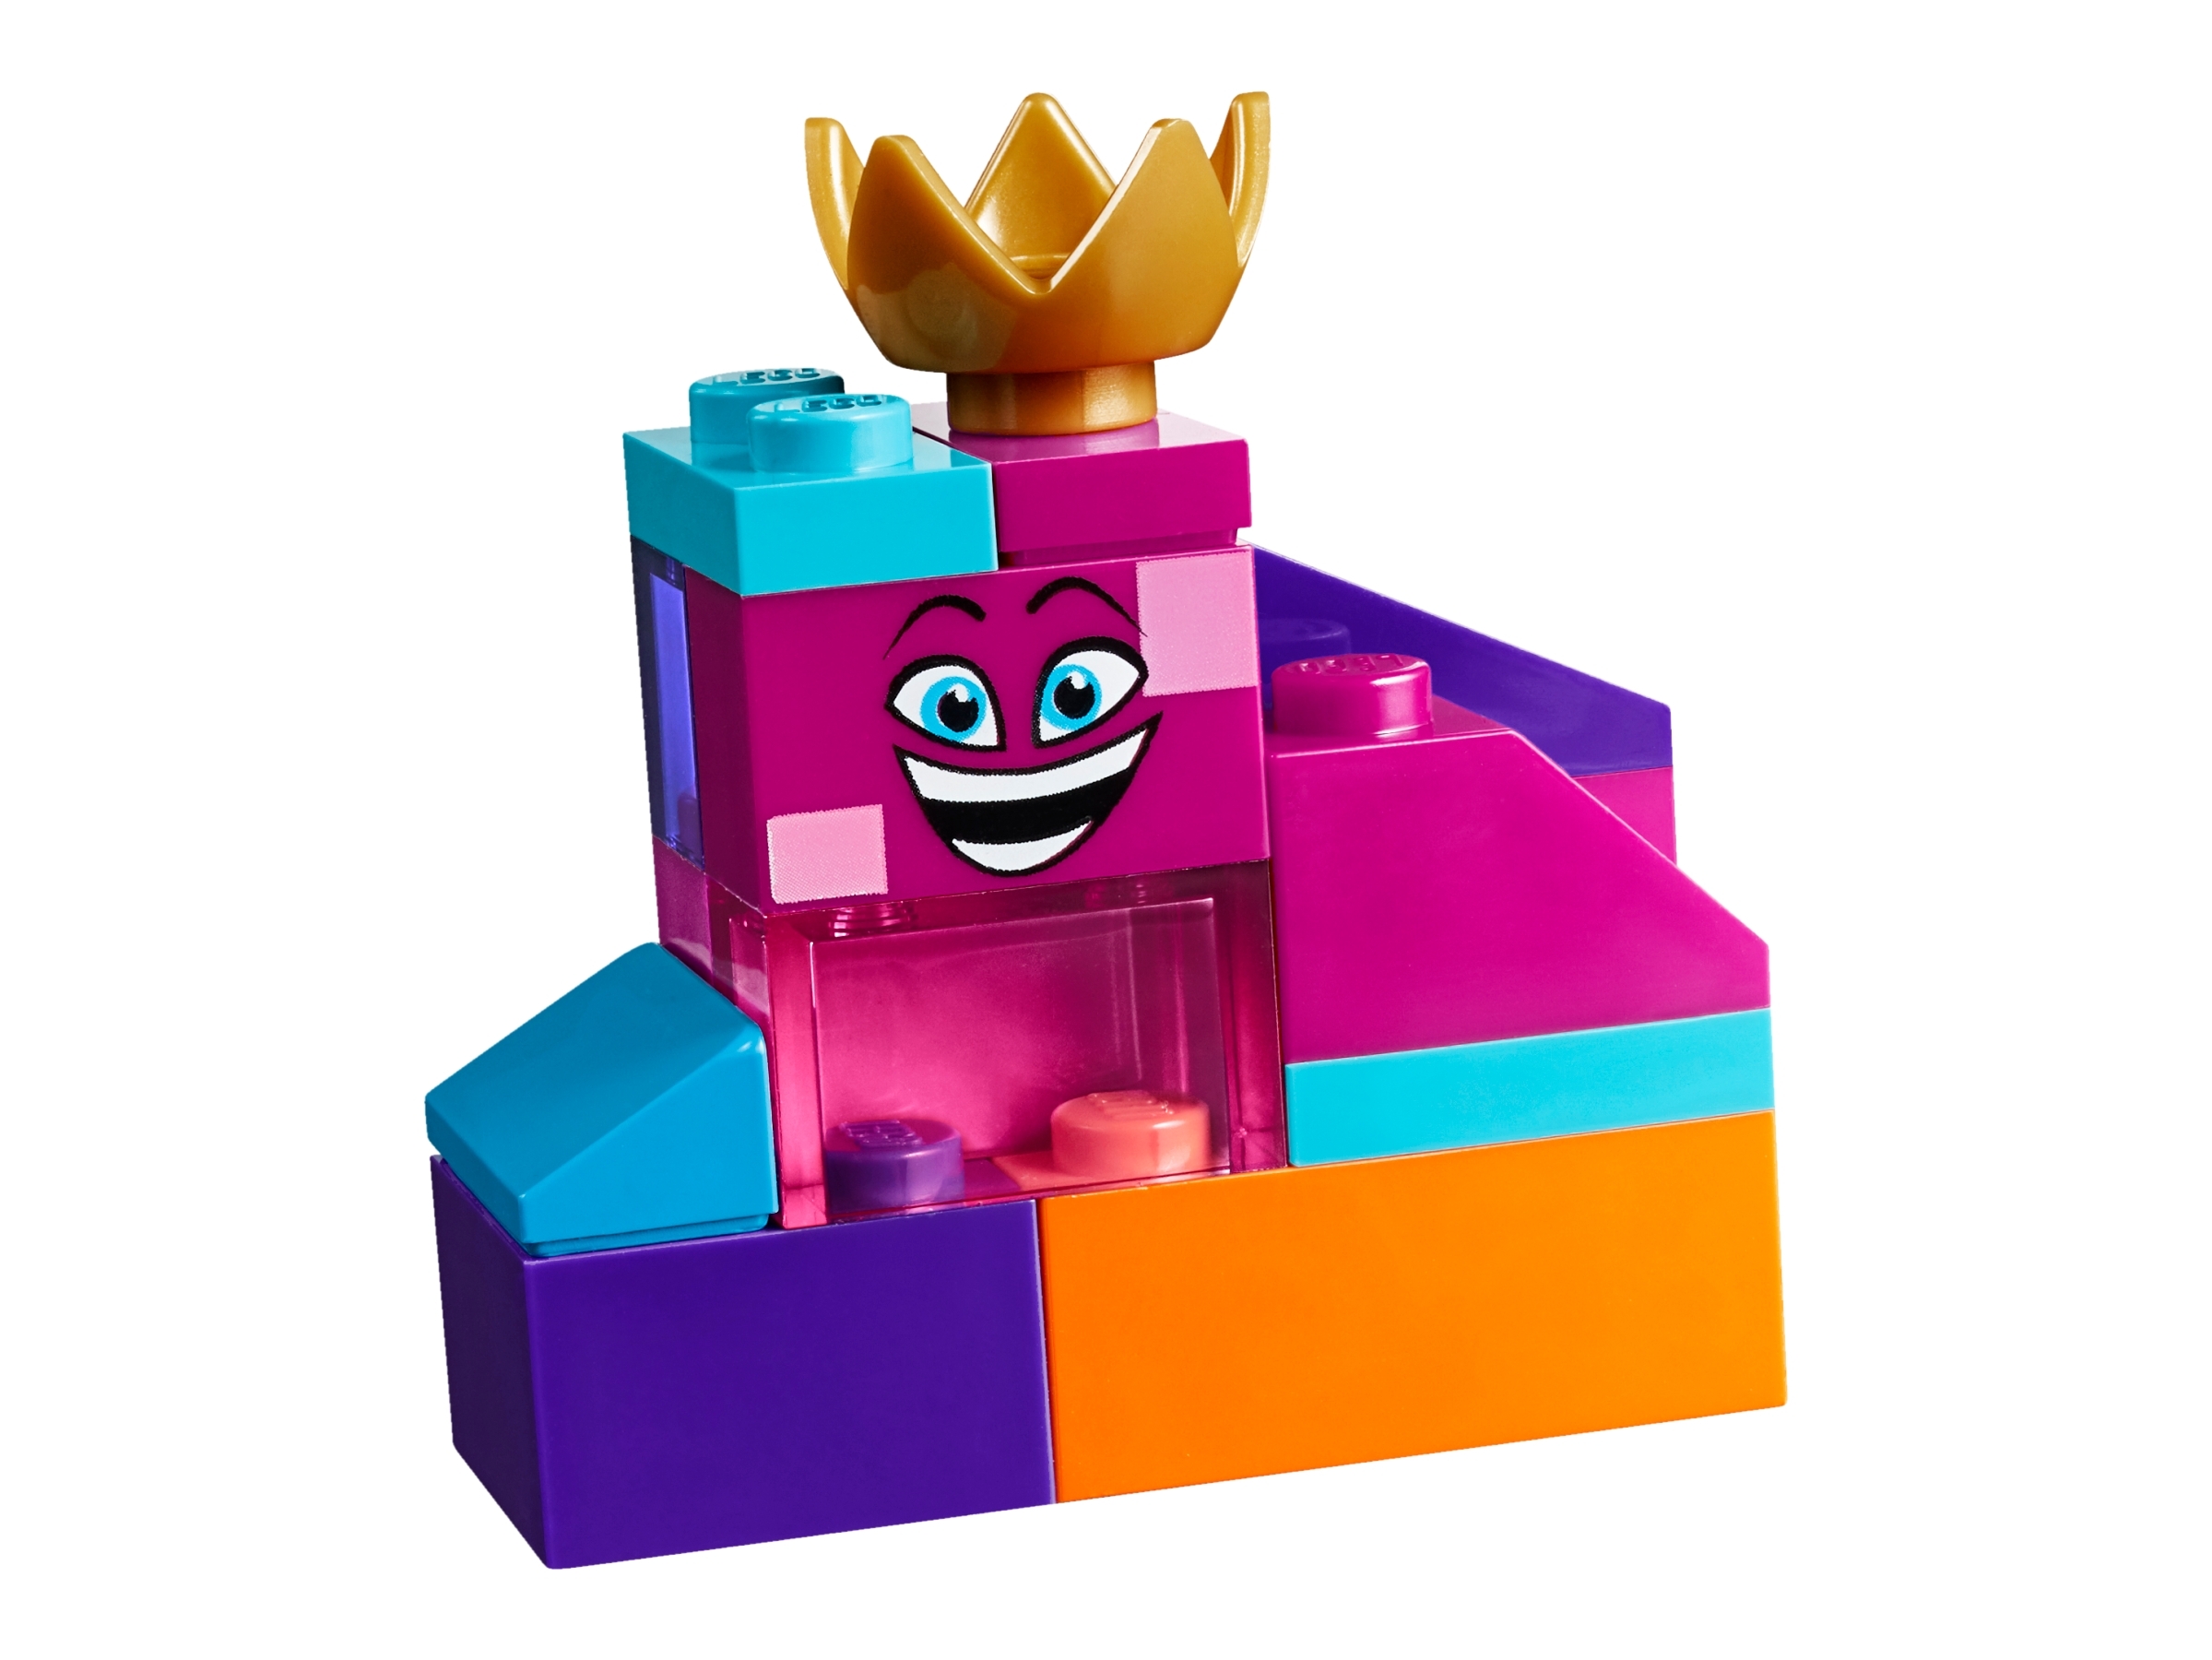 Queen Watevra's 'So-Not-Evil' Palace 70838 | THE LEGO® MOVIE 2™ Buy at Official LEGO® Shop US